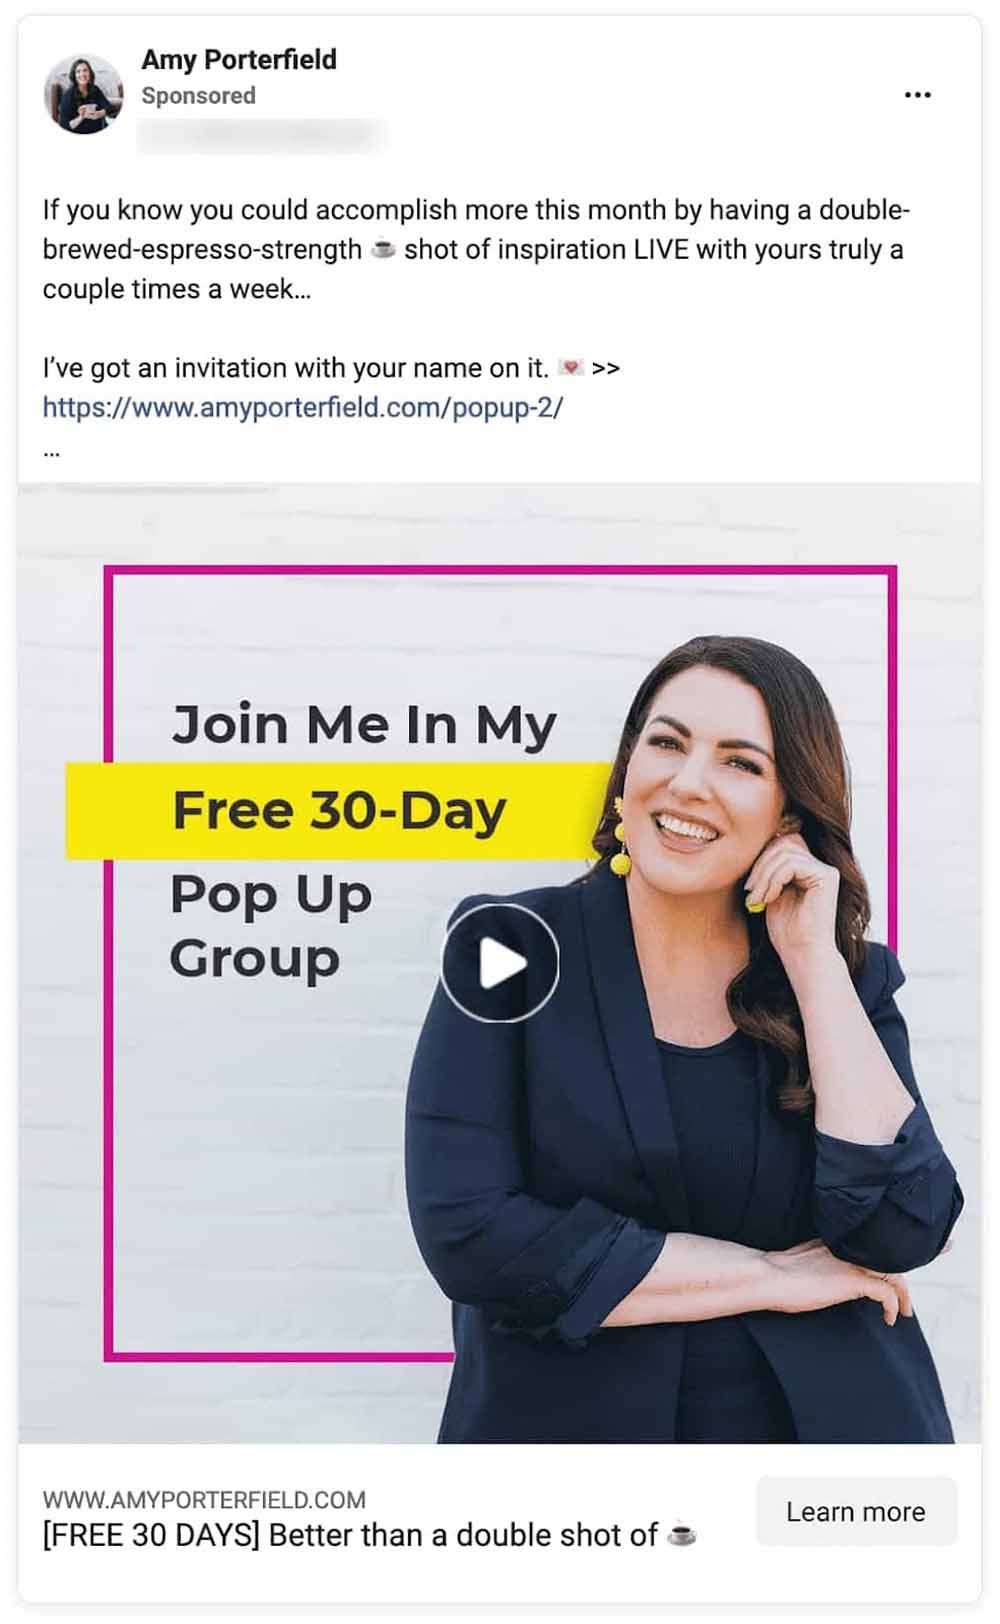 Facebook ad from Amy Porterfield